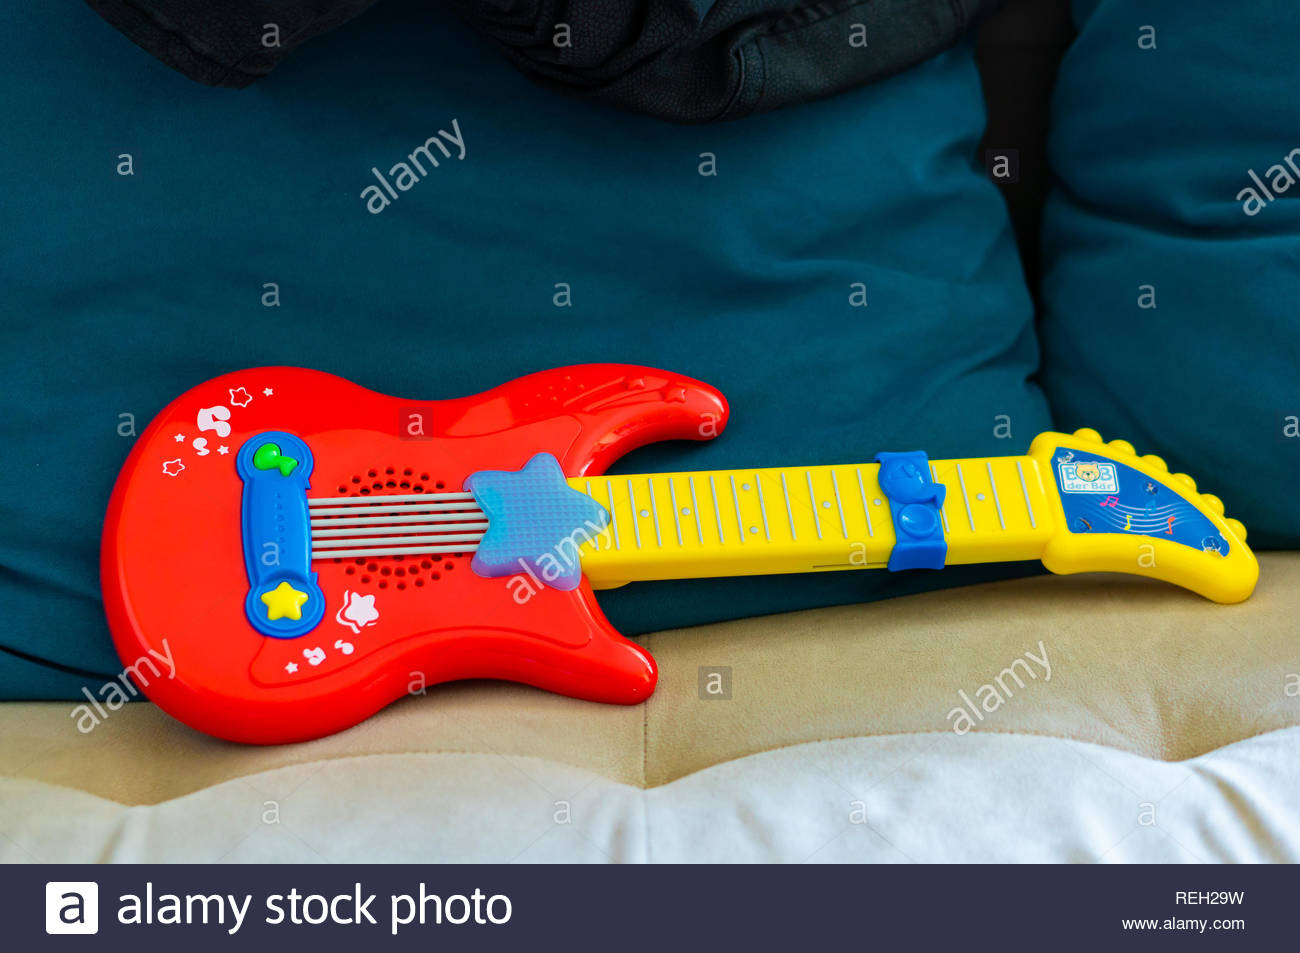 red toy guitar